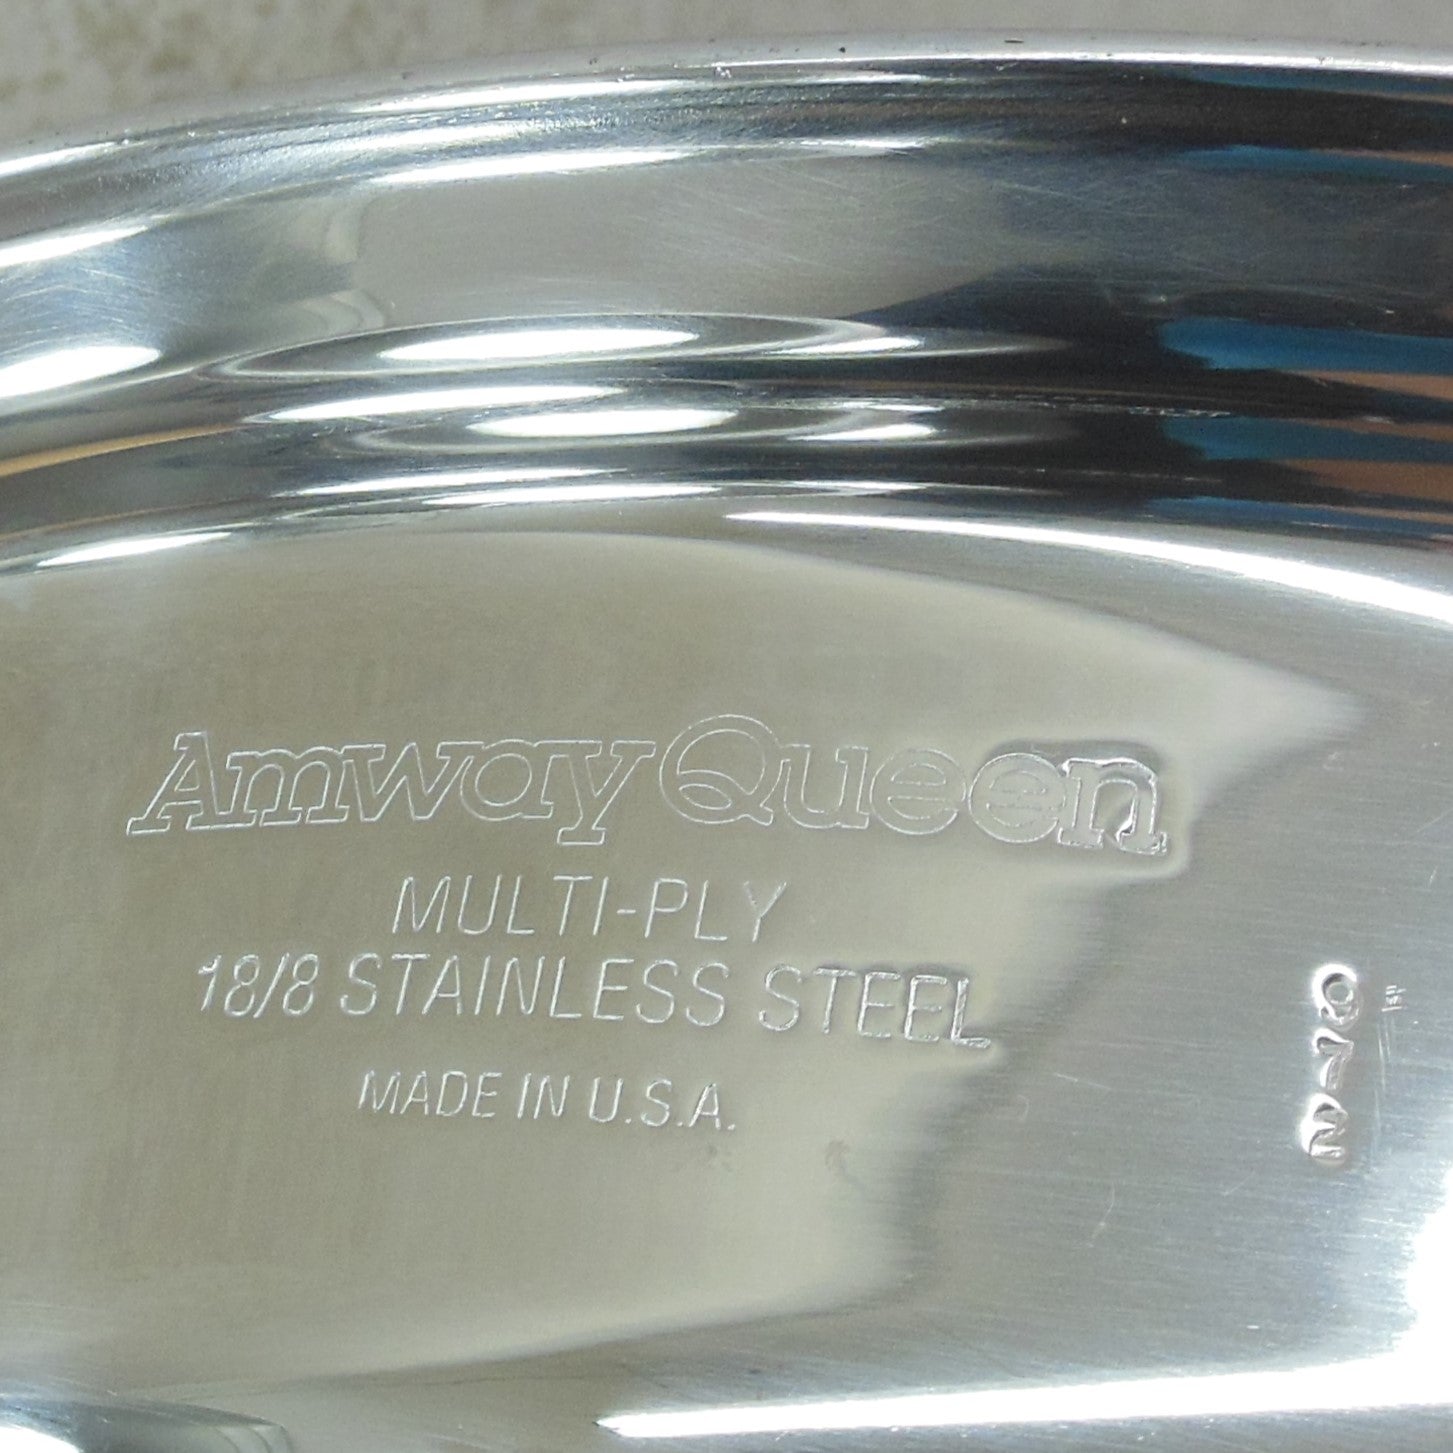 Amway Queen Multi-Ply 18/8 Stainless 10 Skillet u0026 Lid